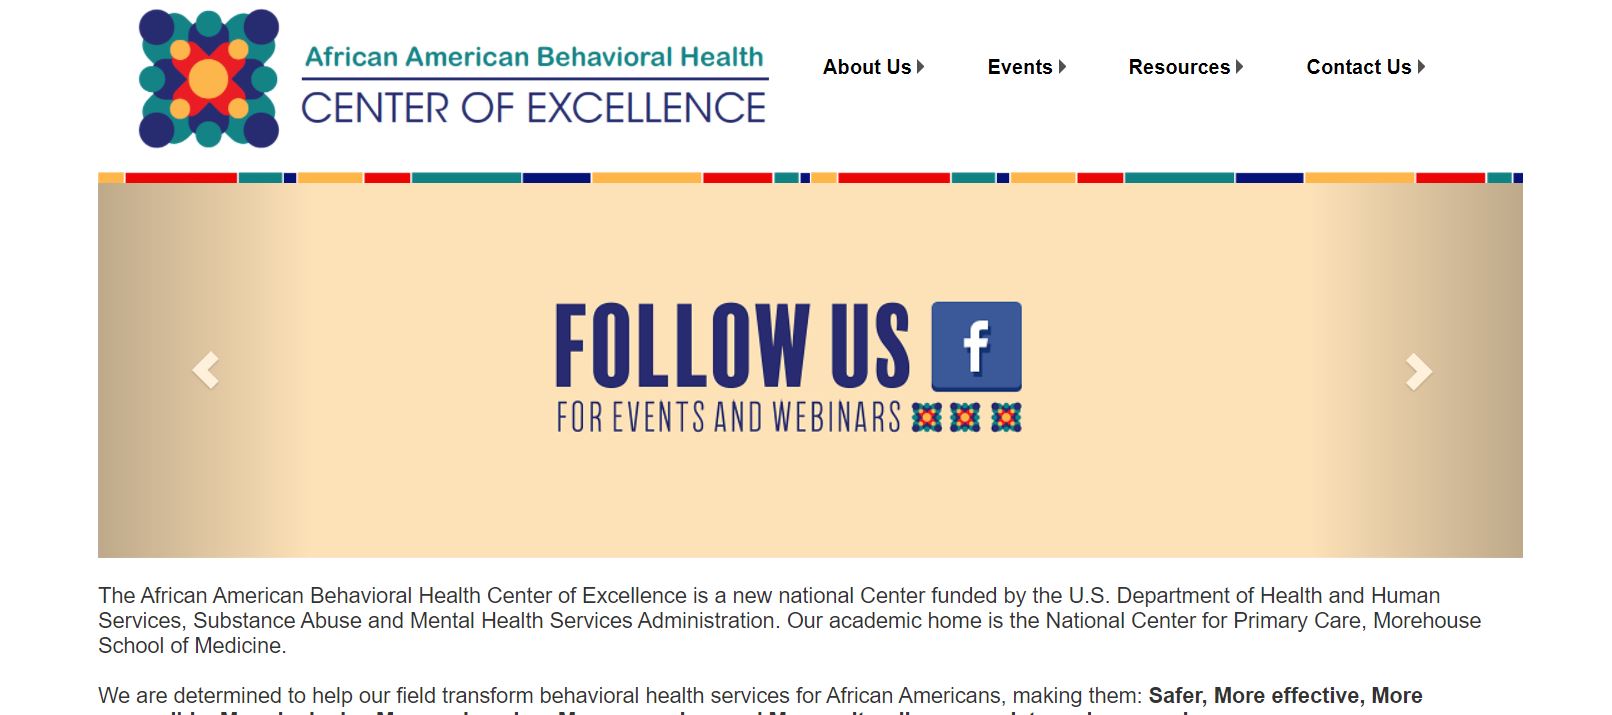 The African American Behavioral Health Center of Excellence